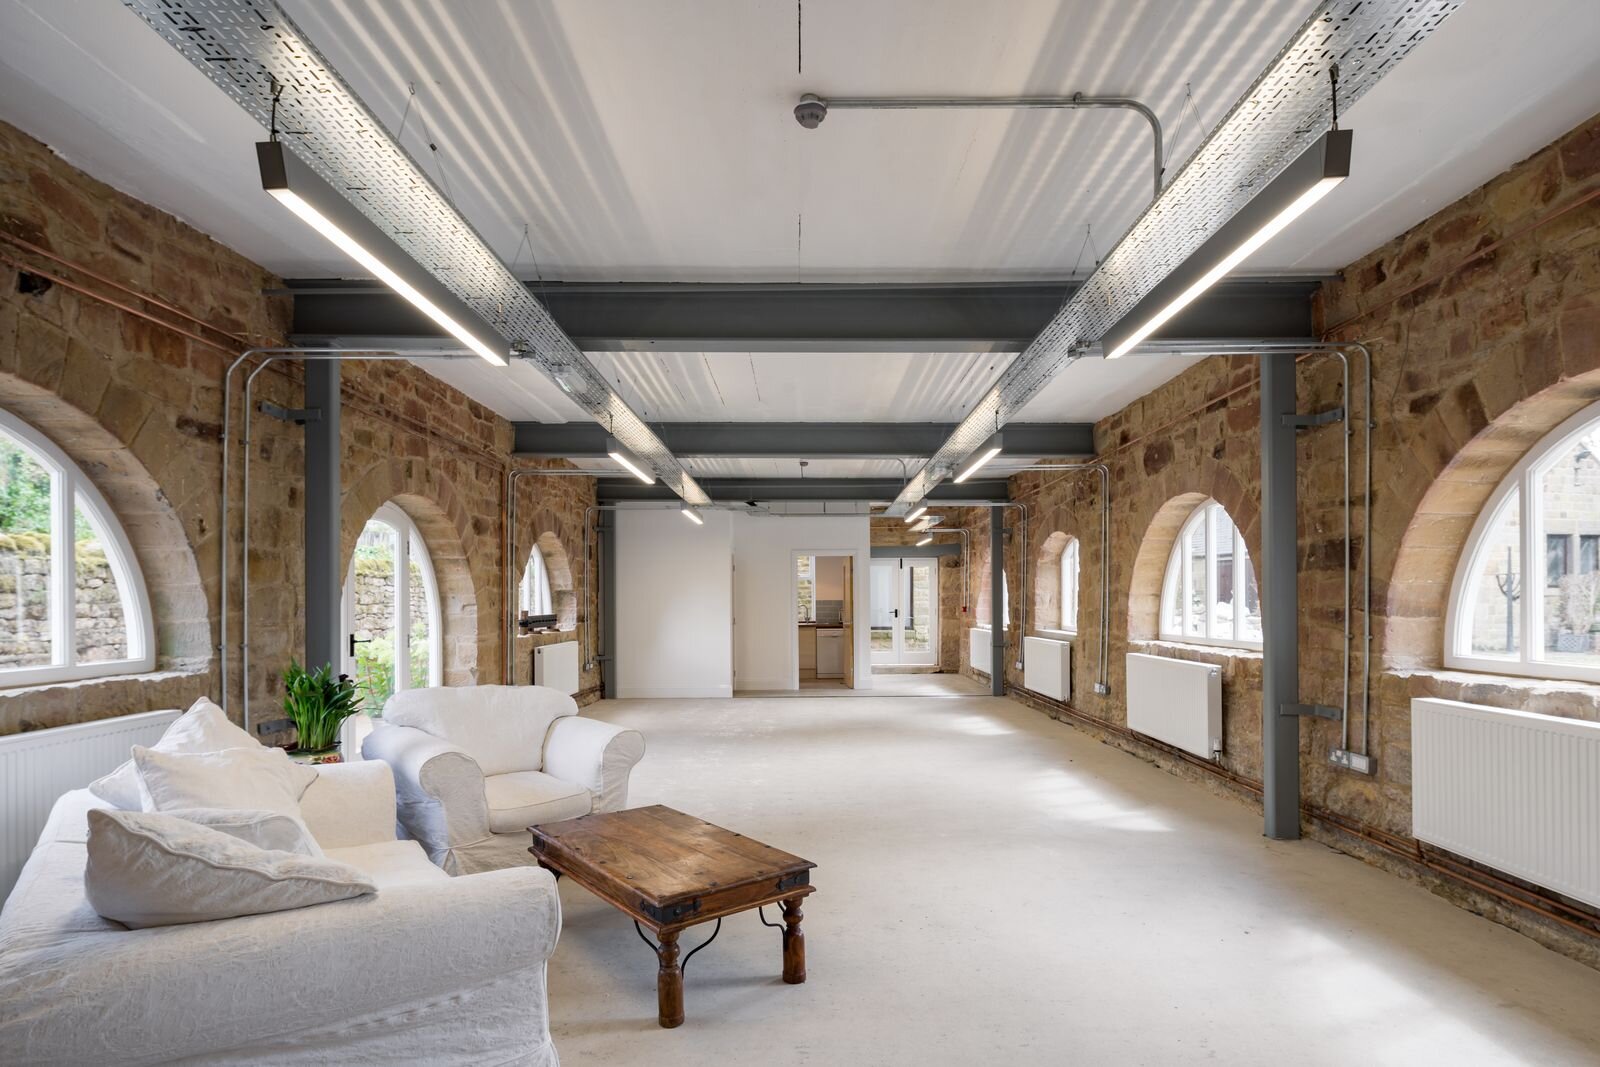 Historic former mill transformed into commercial space